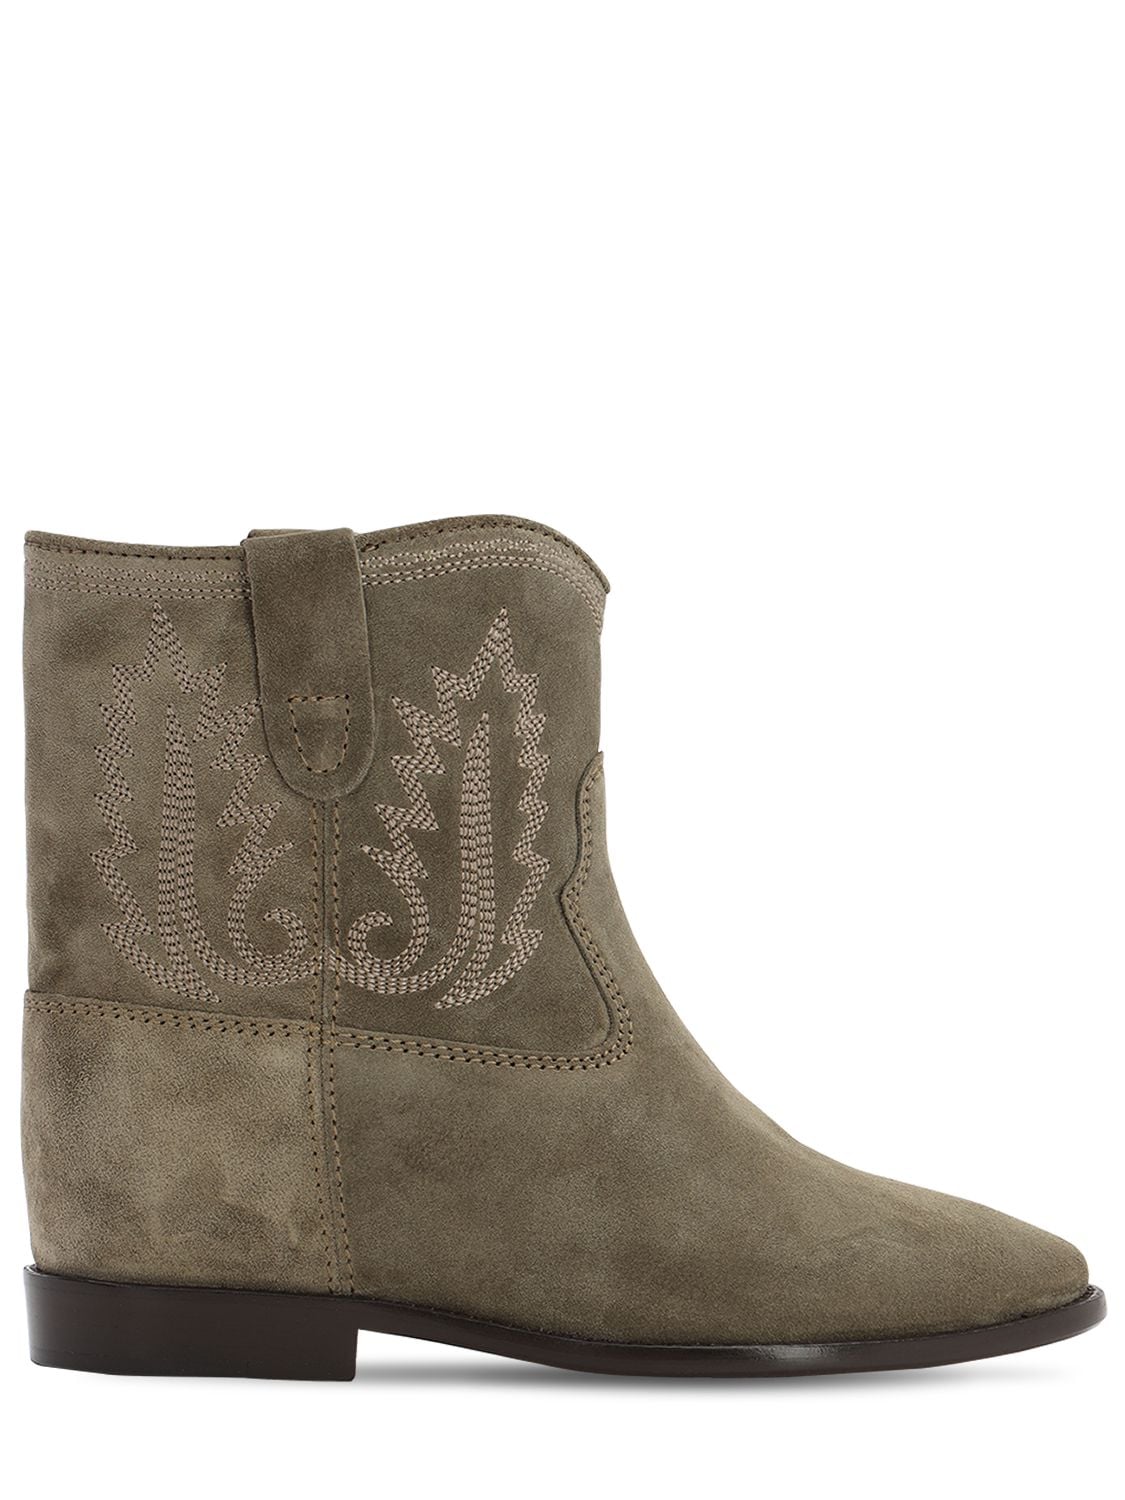 Isabel Marant 60mm Crisi Suede Ankle Boots In Taupe